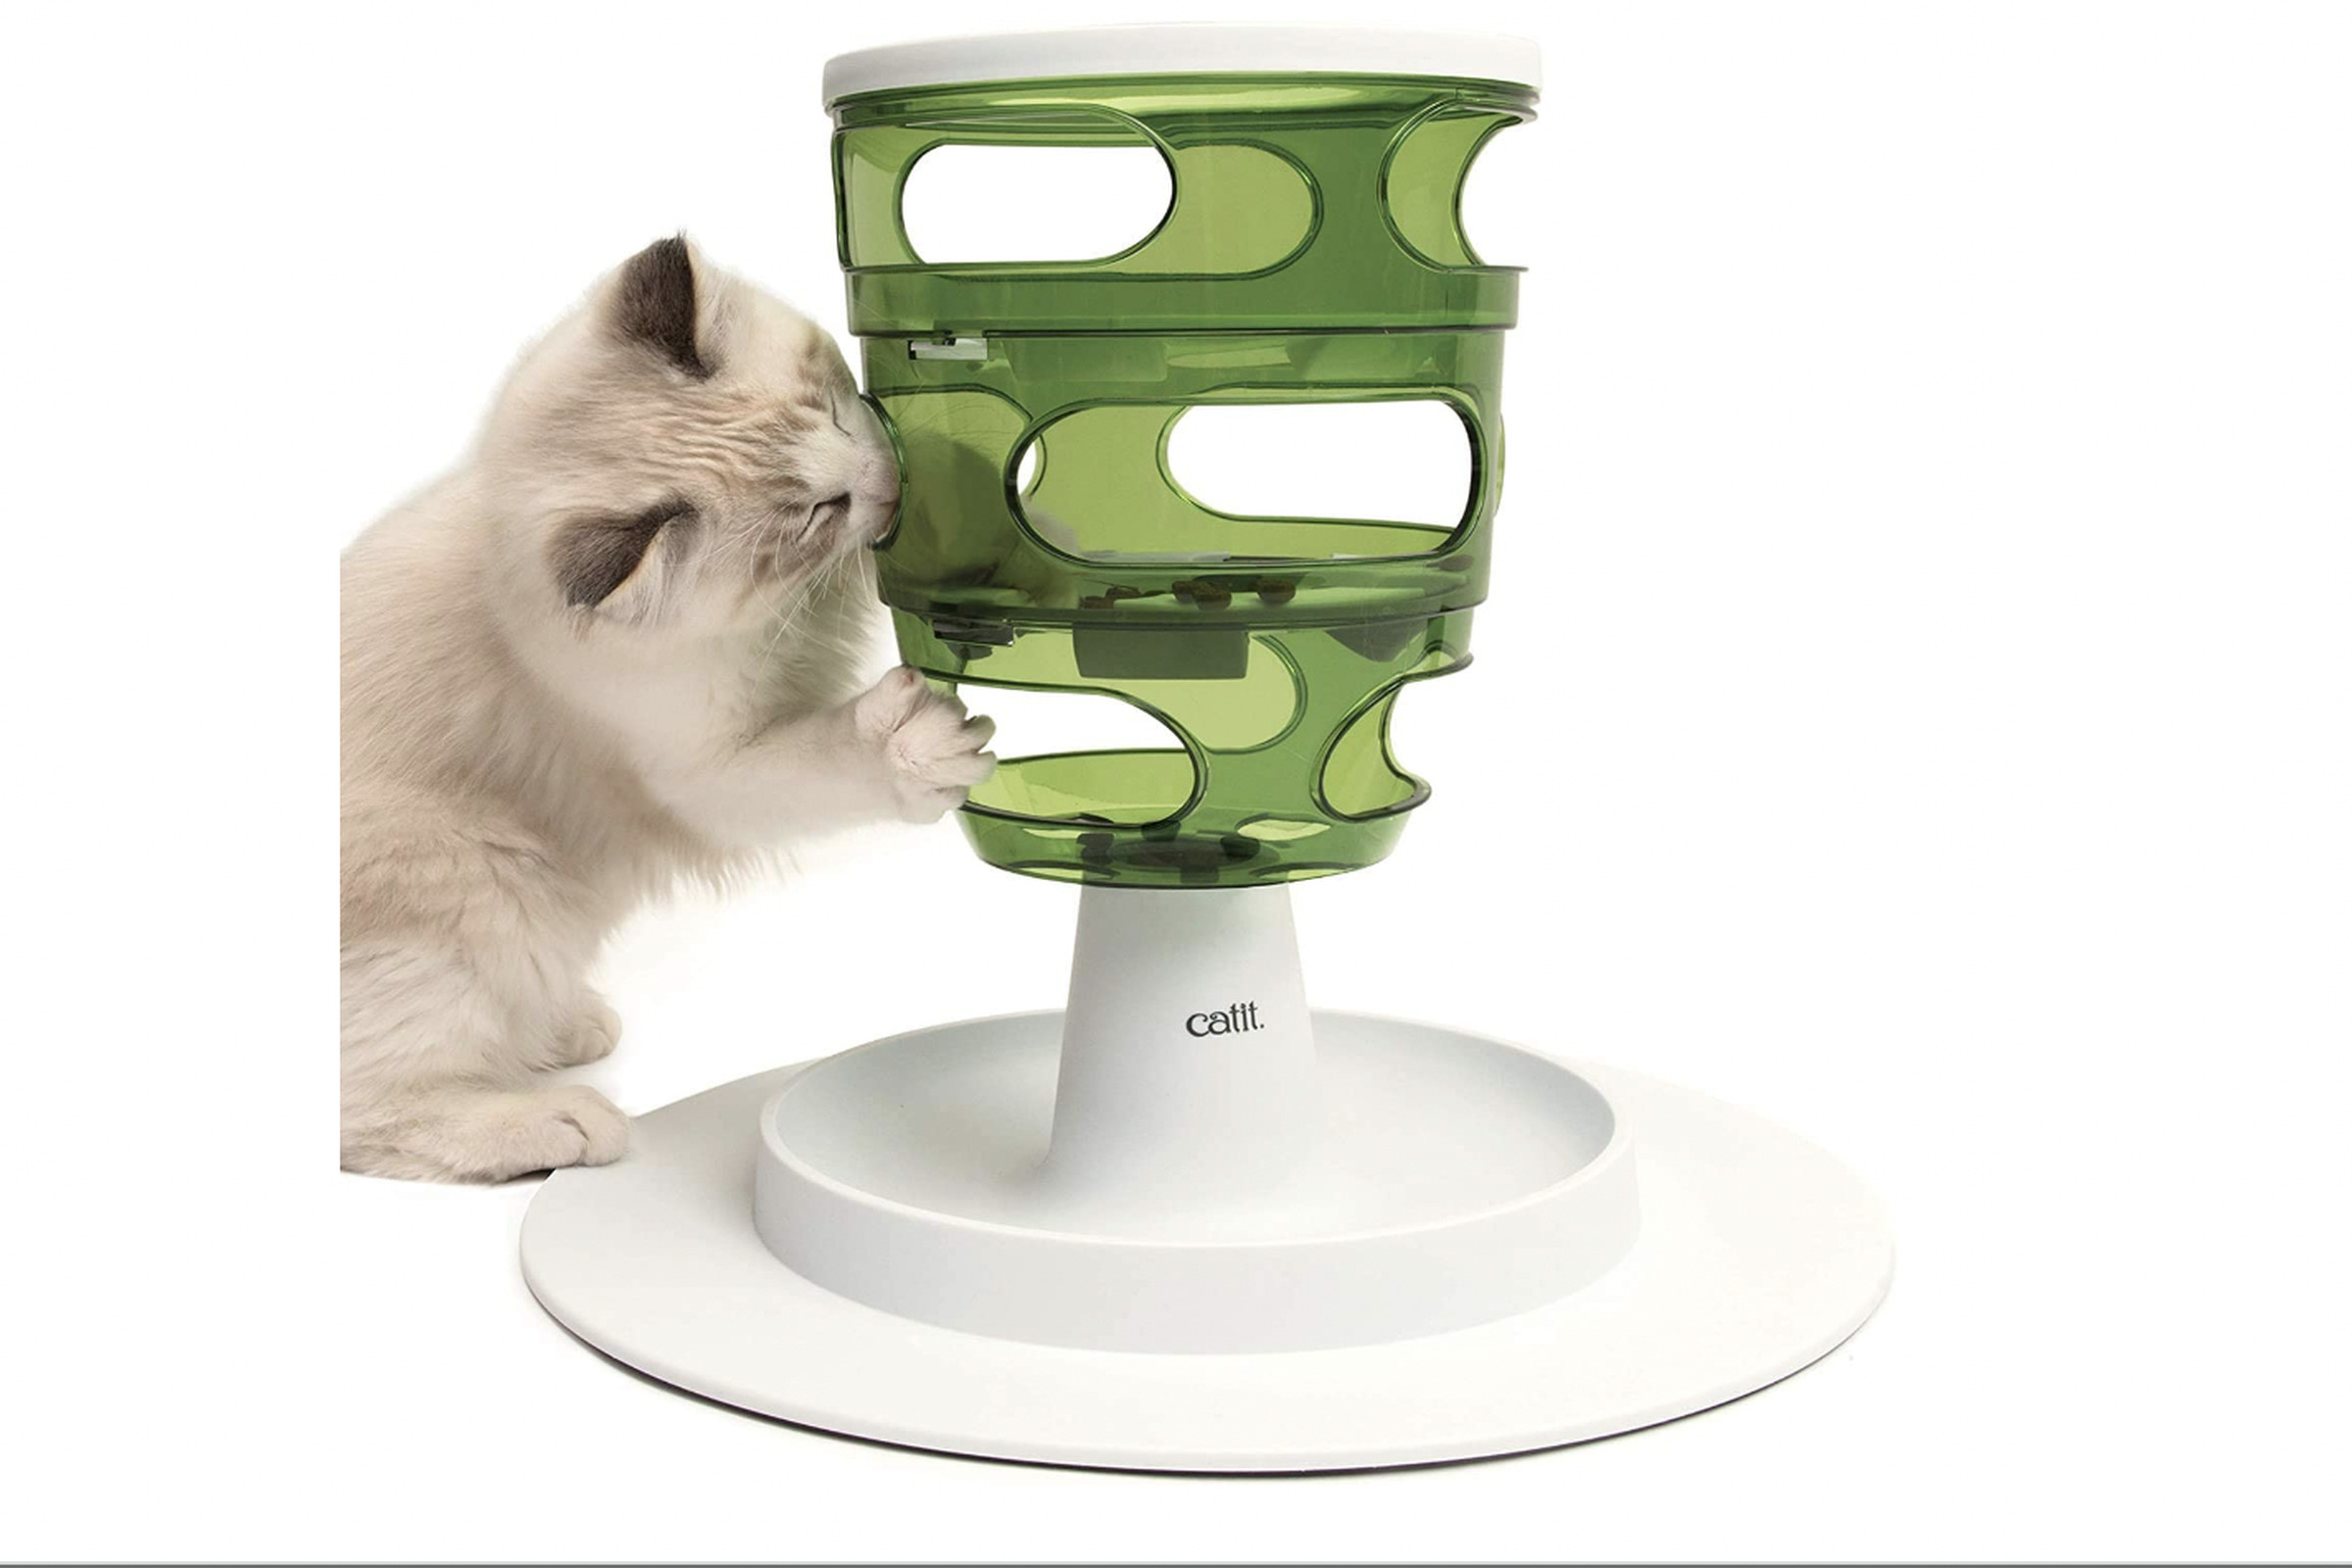 A cat tries to get into a tall plastic tower with openings for food.